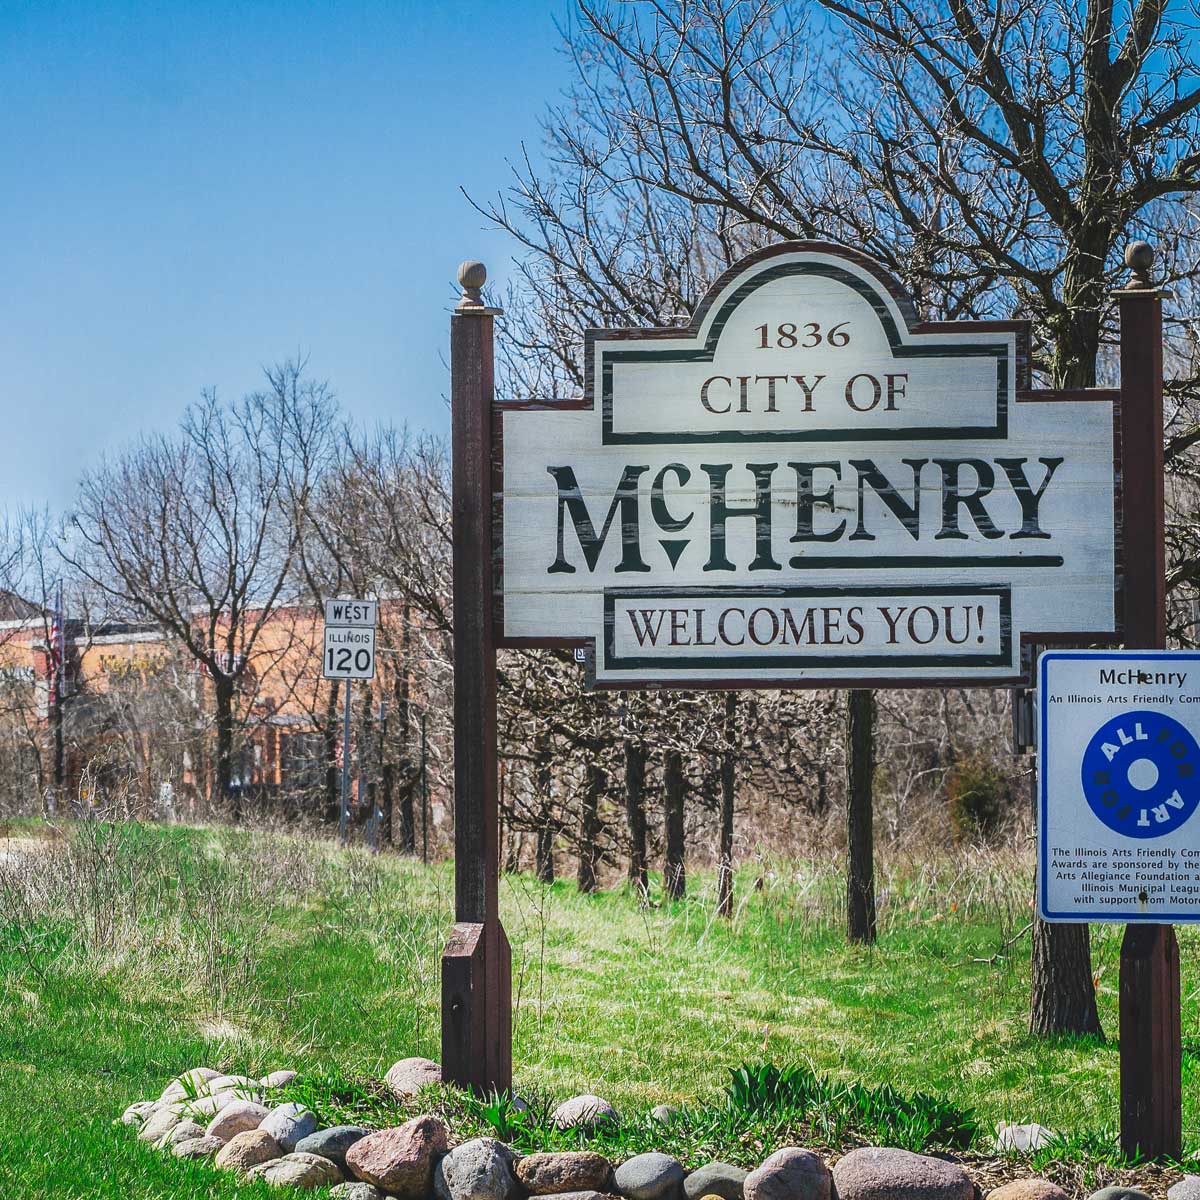 McHenry, IL welcome sign